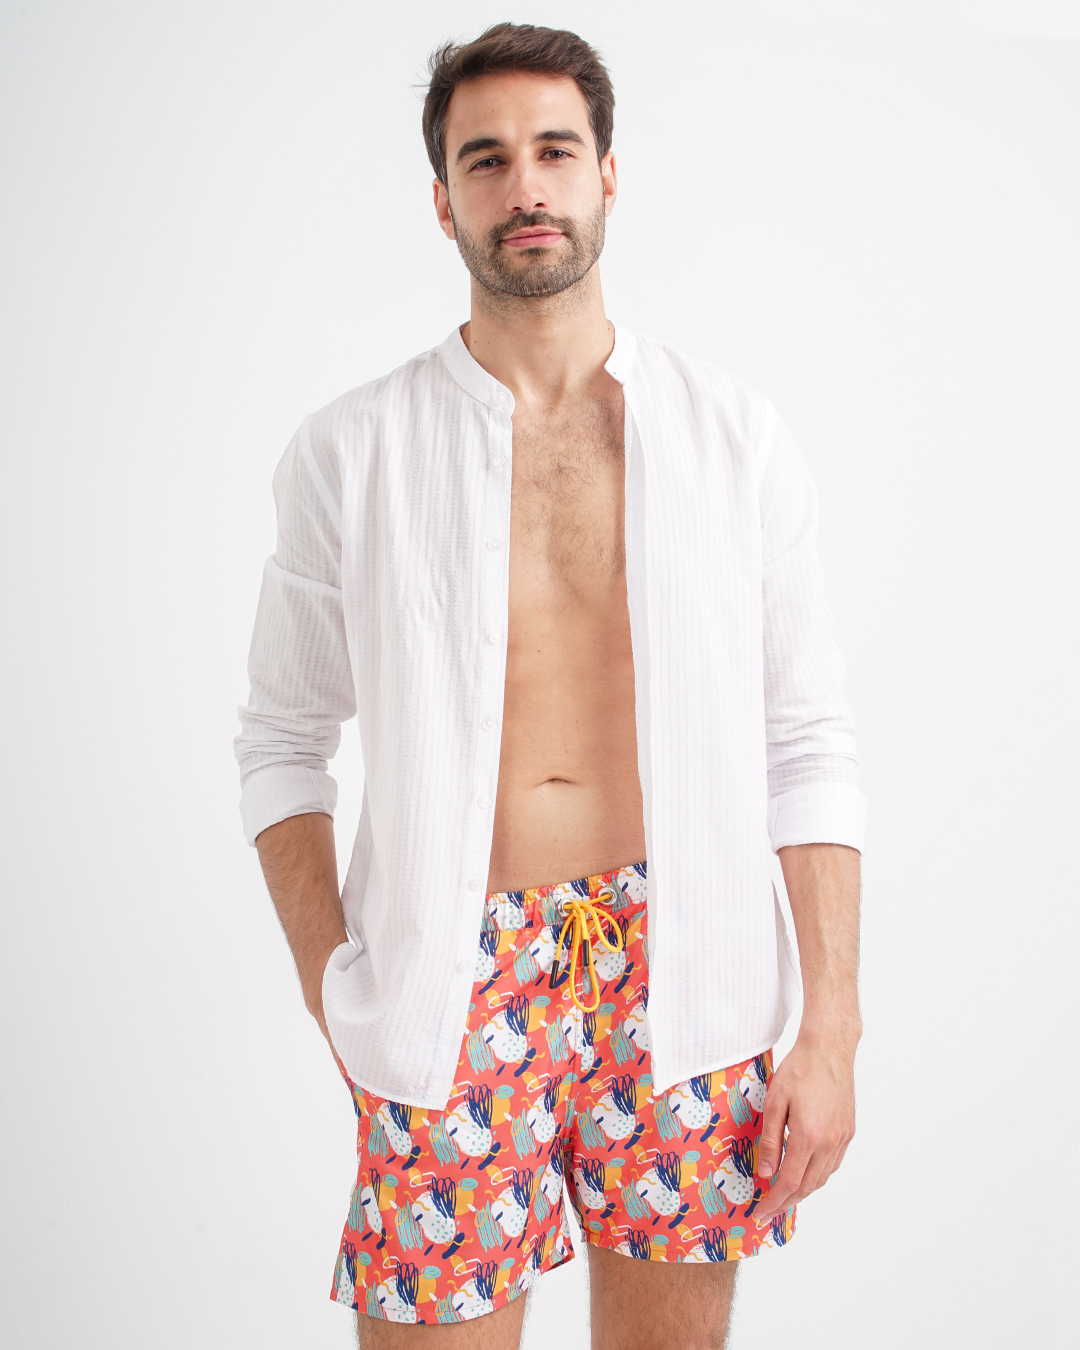 Abstract men's swimsuit